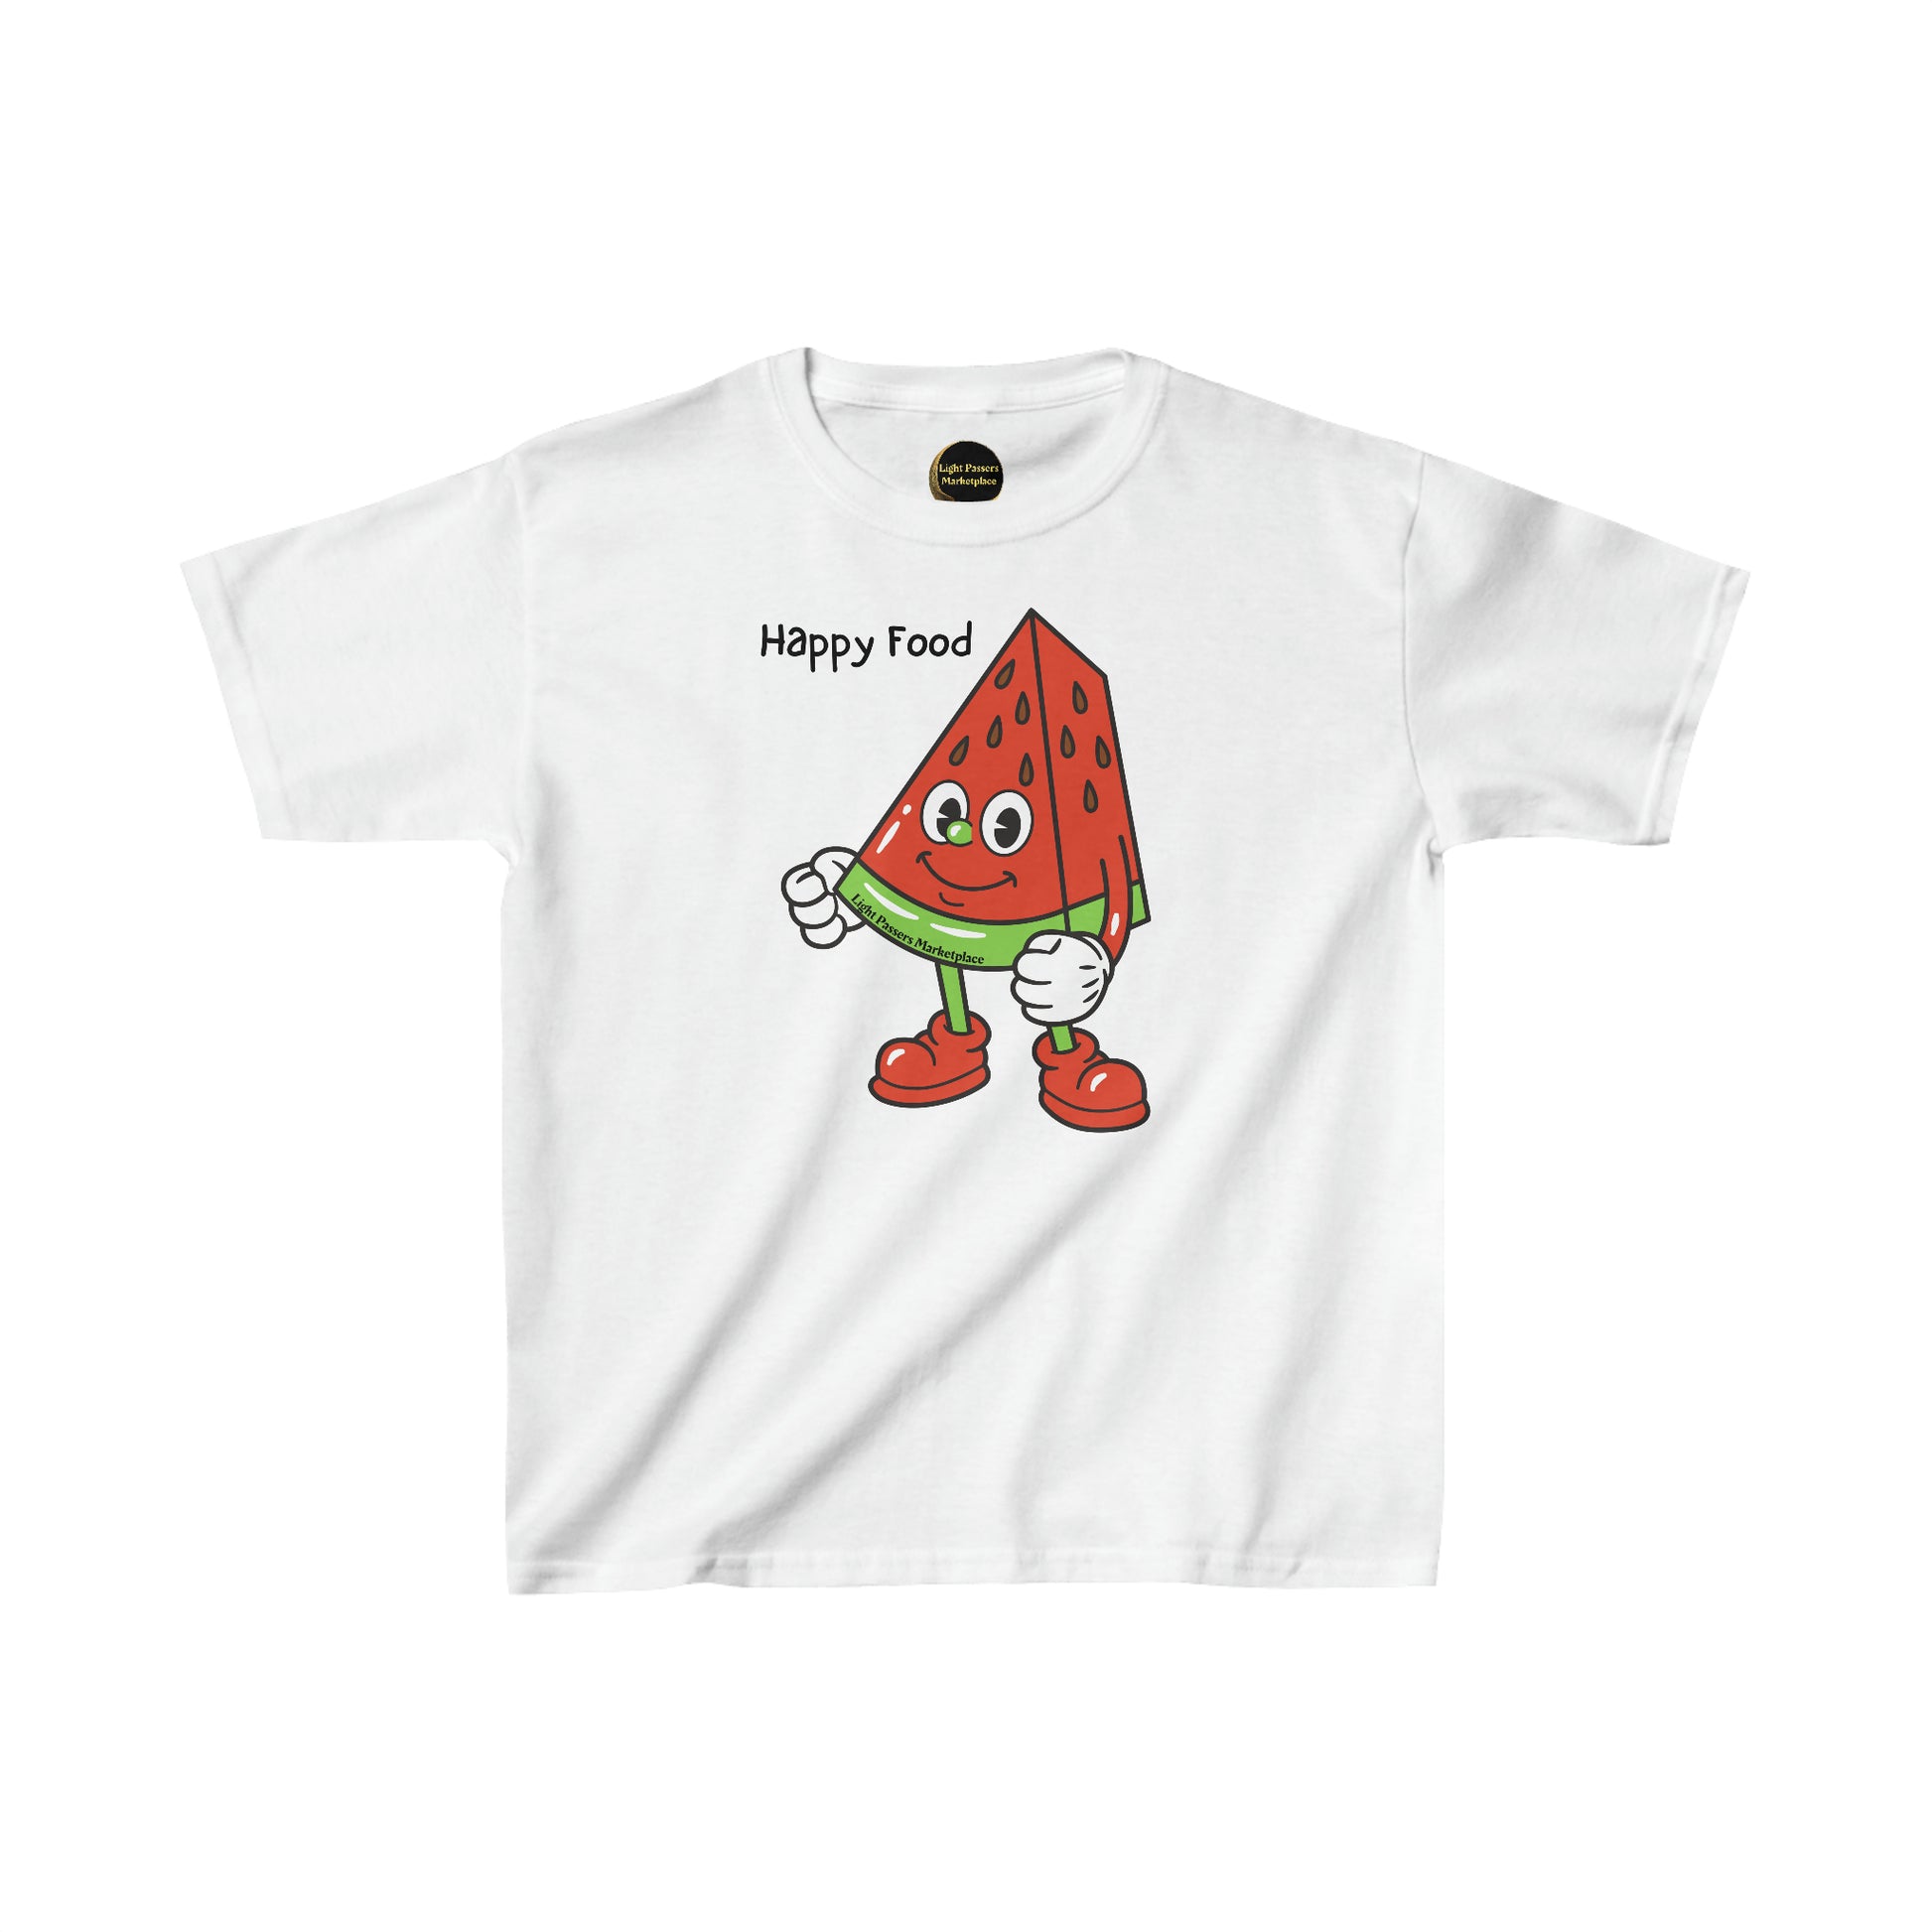 A white youth t-shirt featuring a cartoon watermelon character. Made of 100% cotton, with twill tape shoulders and curl-resistant collar for durability. Ethically sourced US cotton.